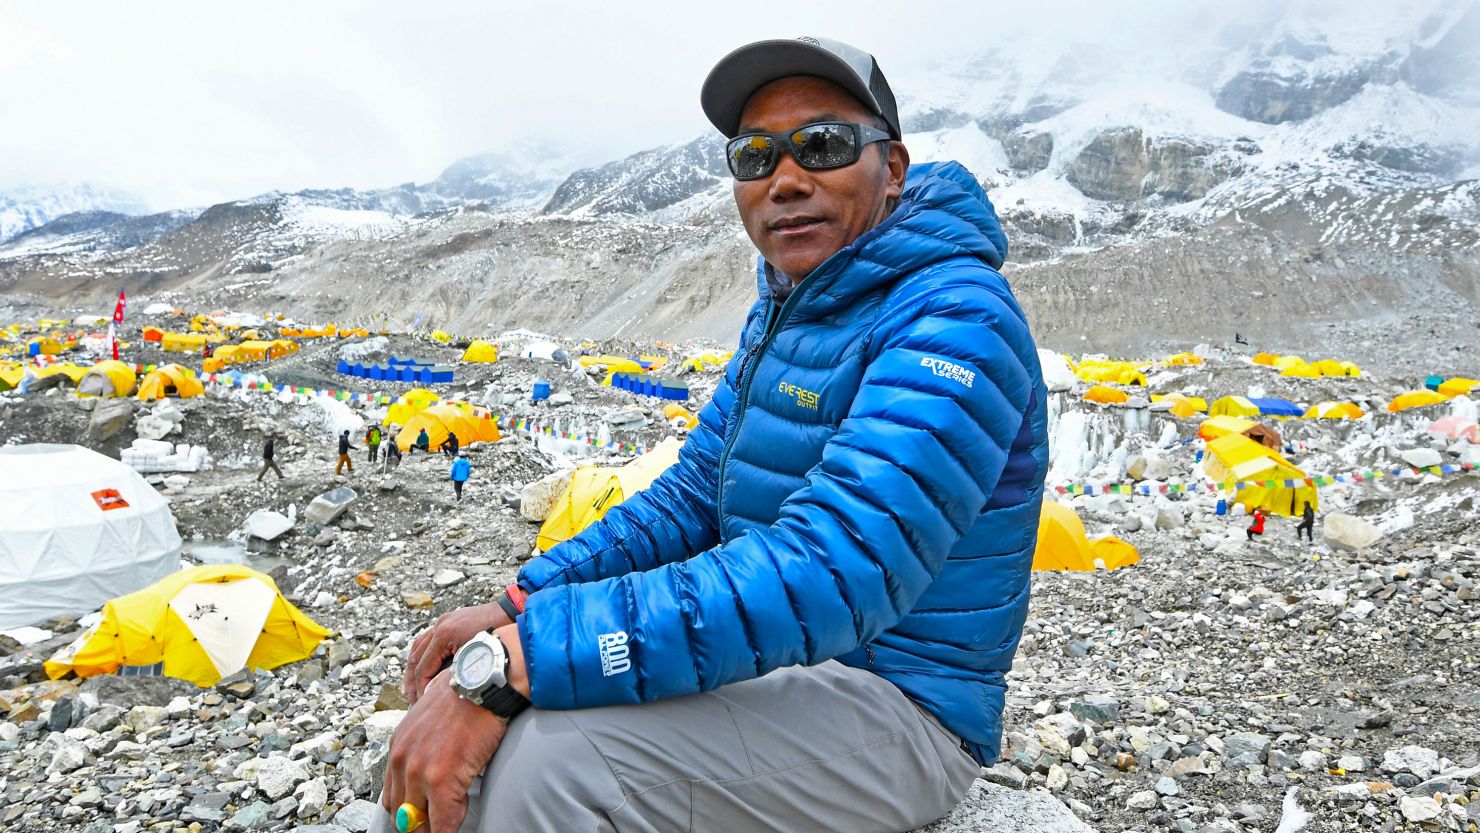 Nepal's mountaineer Kami Rita Sherpa poses at the Everest base camp in the Mount Everest region of Solukhumbu district on May 2, 2021.